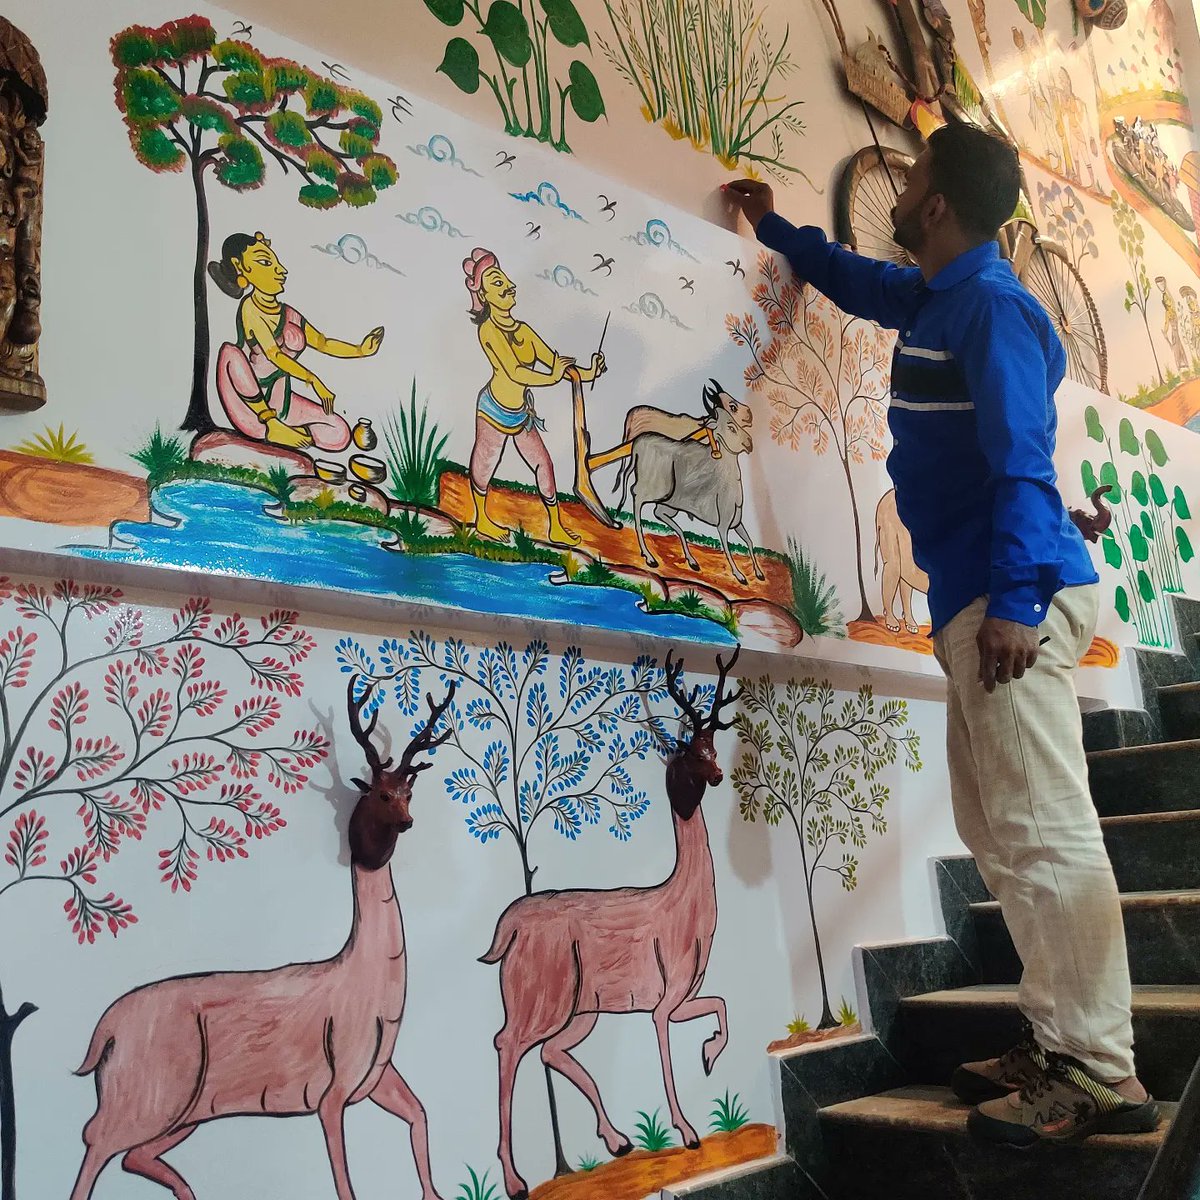 It's always a treat to watch our #pattachitra artists from Odisha turn our walls into extraordinary narratives. #gitag #geographicalindications #geographicalindication #gitagged #bengaluru #bengalurudiaries #pattachitrapainting